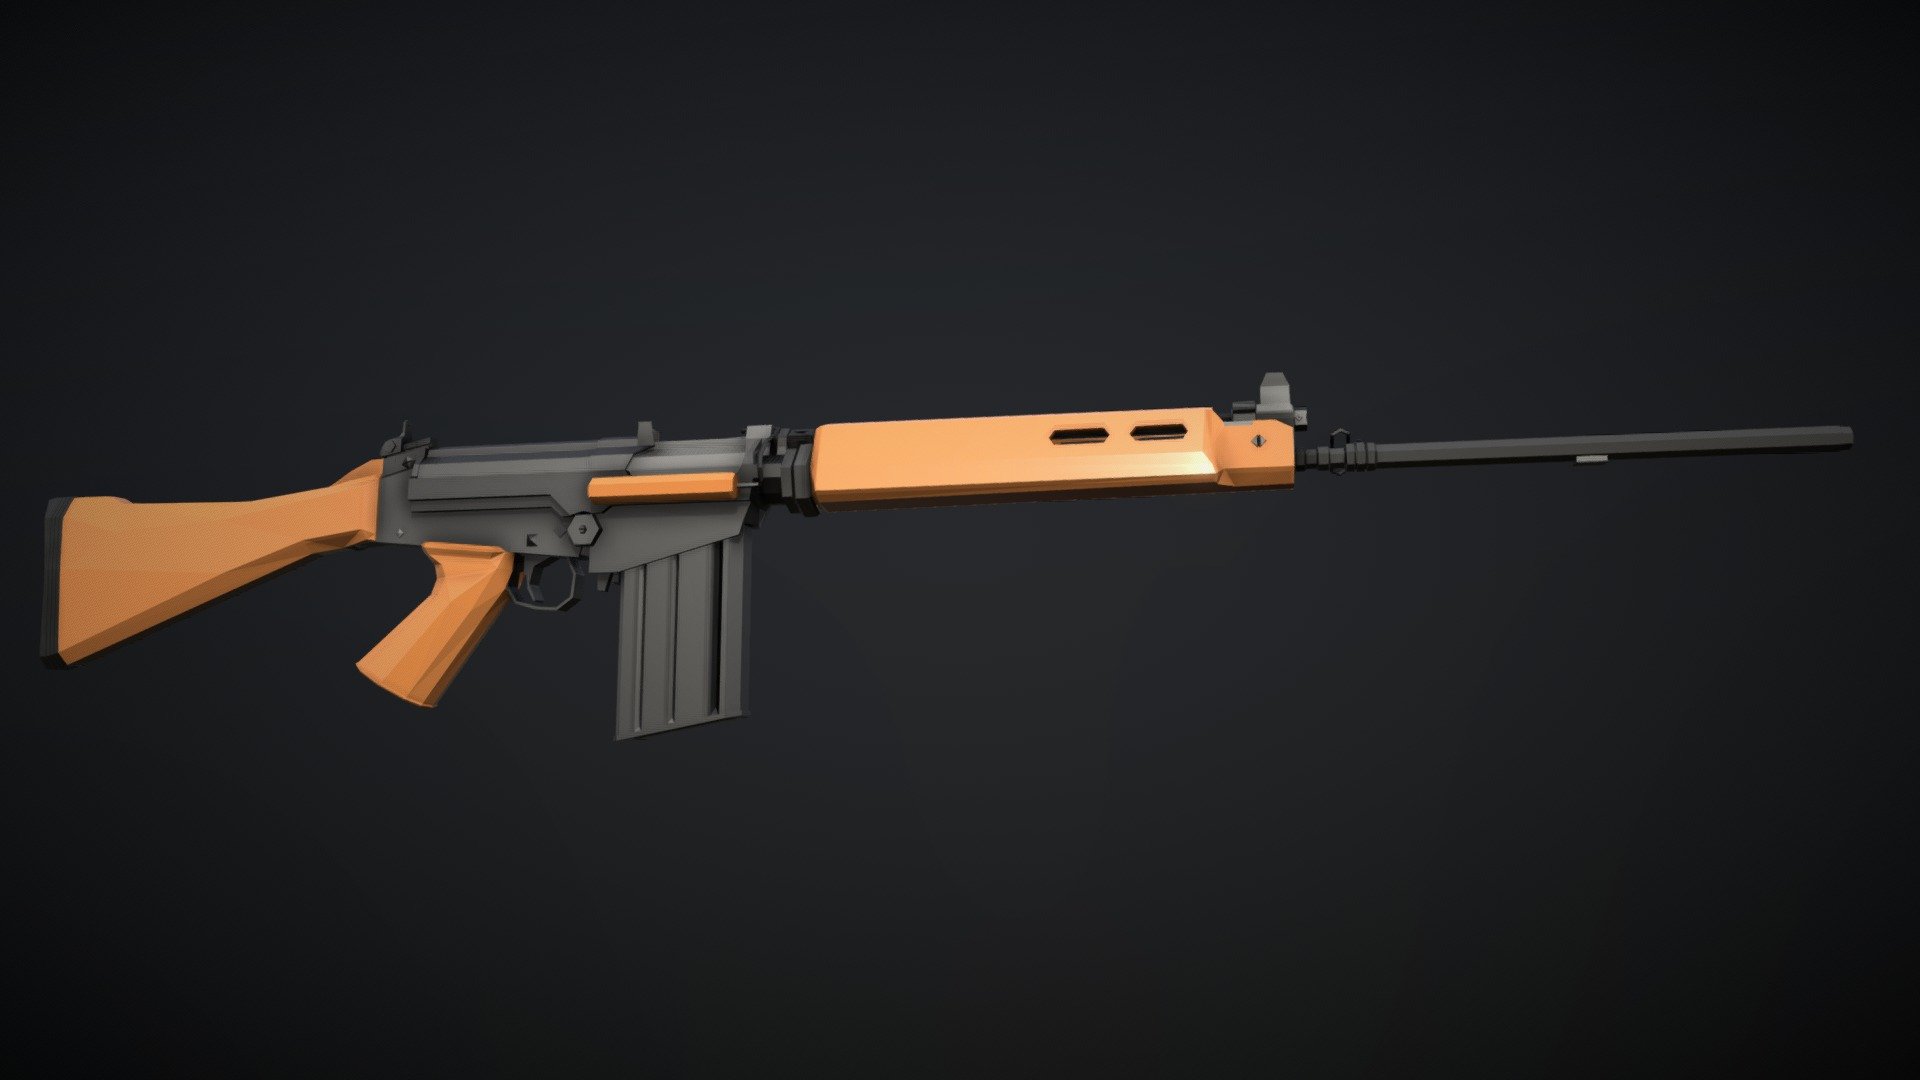 Low-Poly model of the FN X8E1 rifle, a variant of the FAL produced for british weapon trials. This weapon has a couple of interesting features, including the ability to load stripper clips from the top, and a forward assist. while many of these features were ultimately abandoned, the rifle would ultimately be adopted as the L1A1 Self-Loading Rifle 3d model